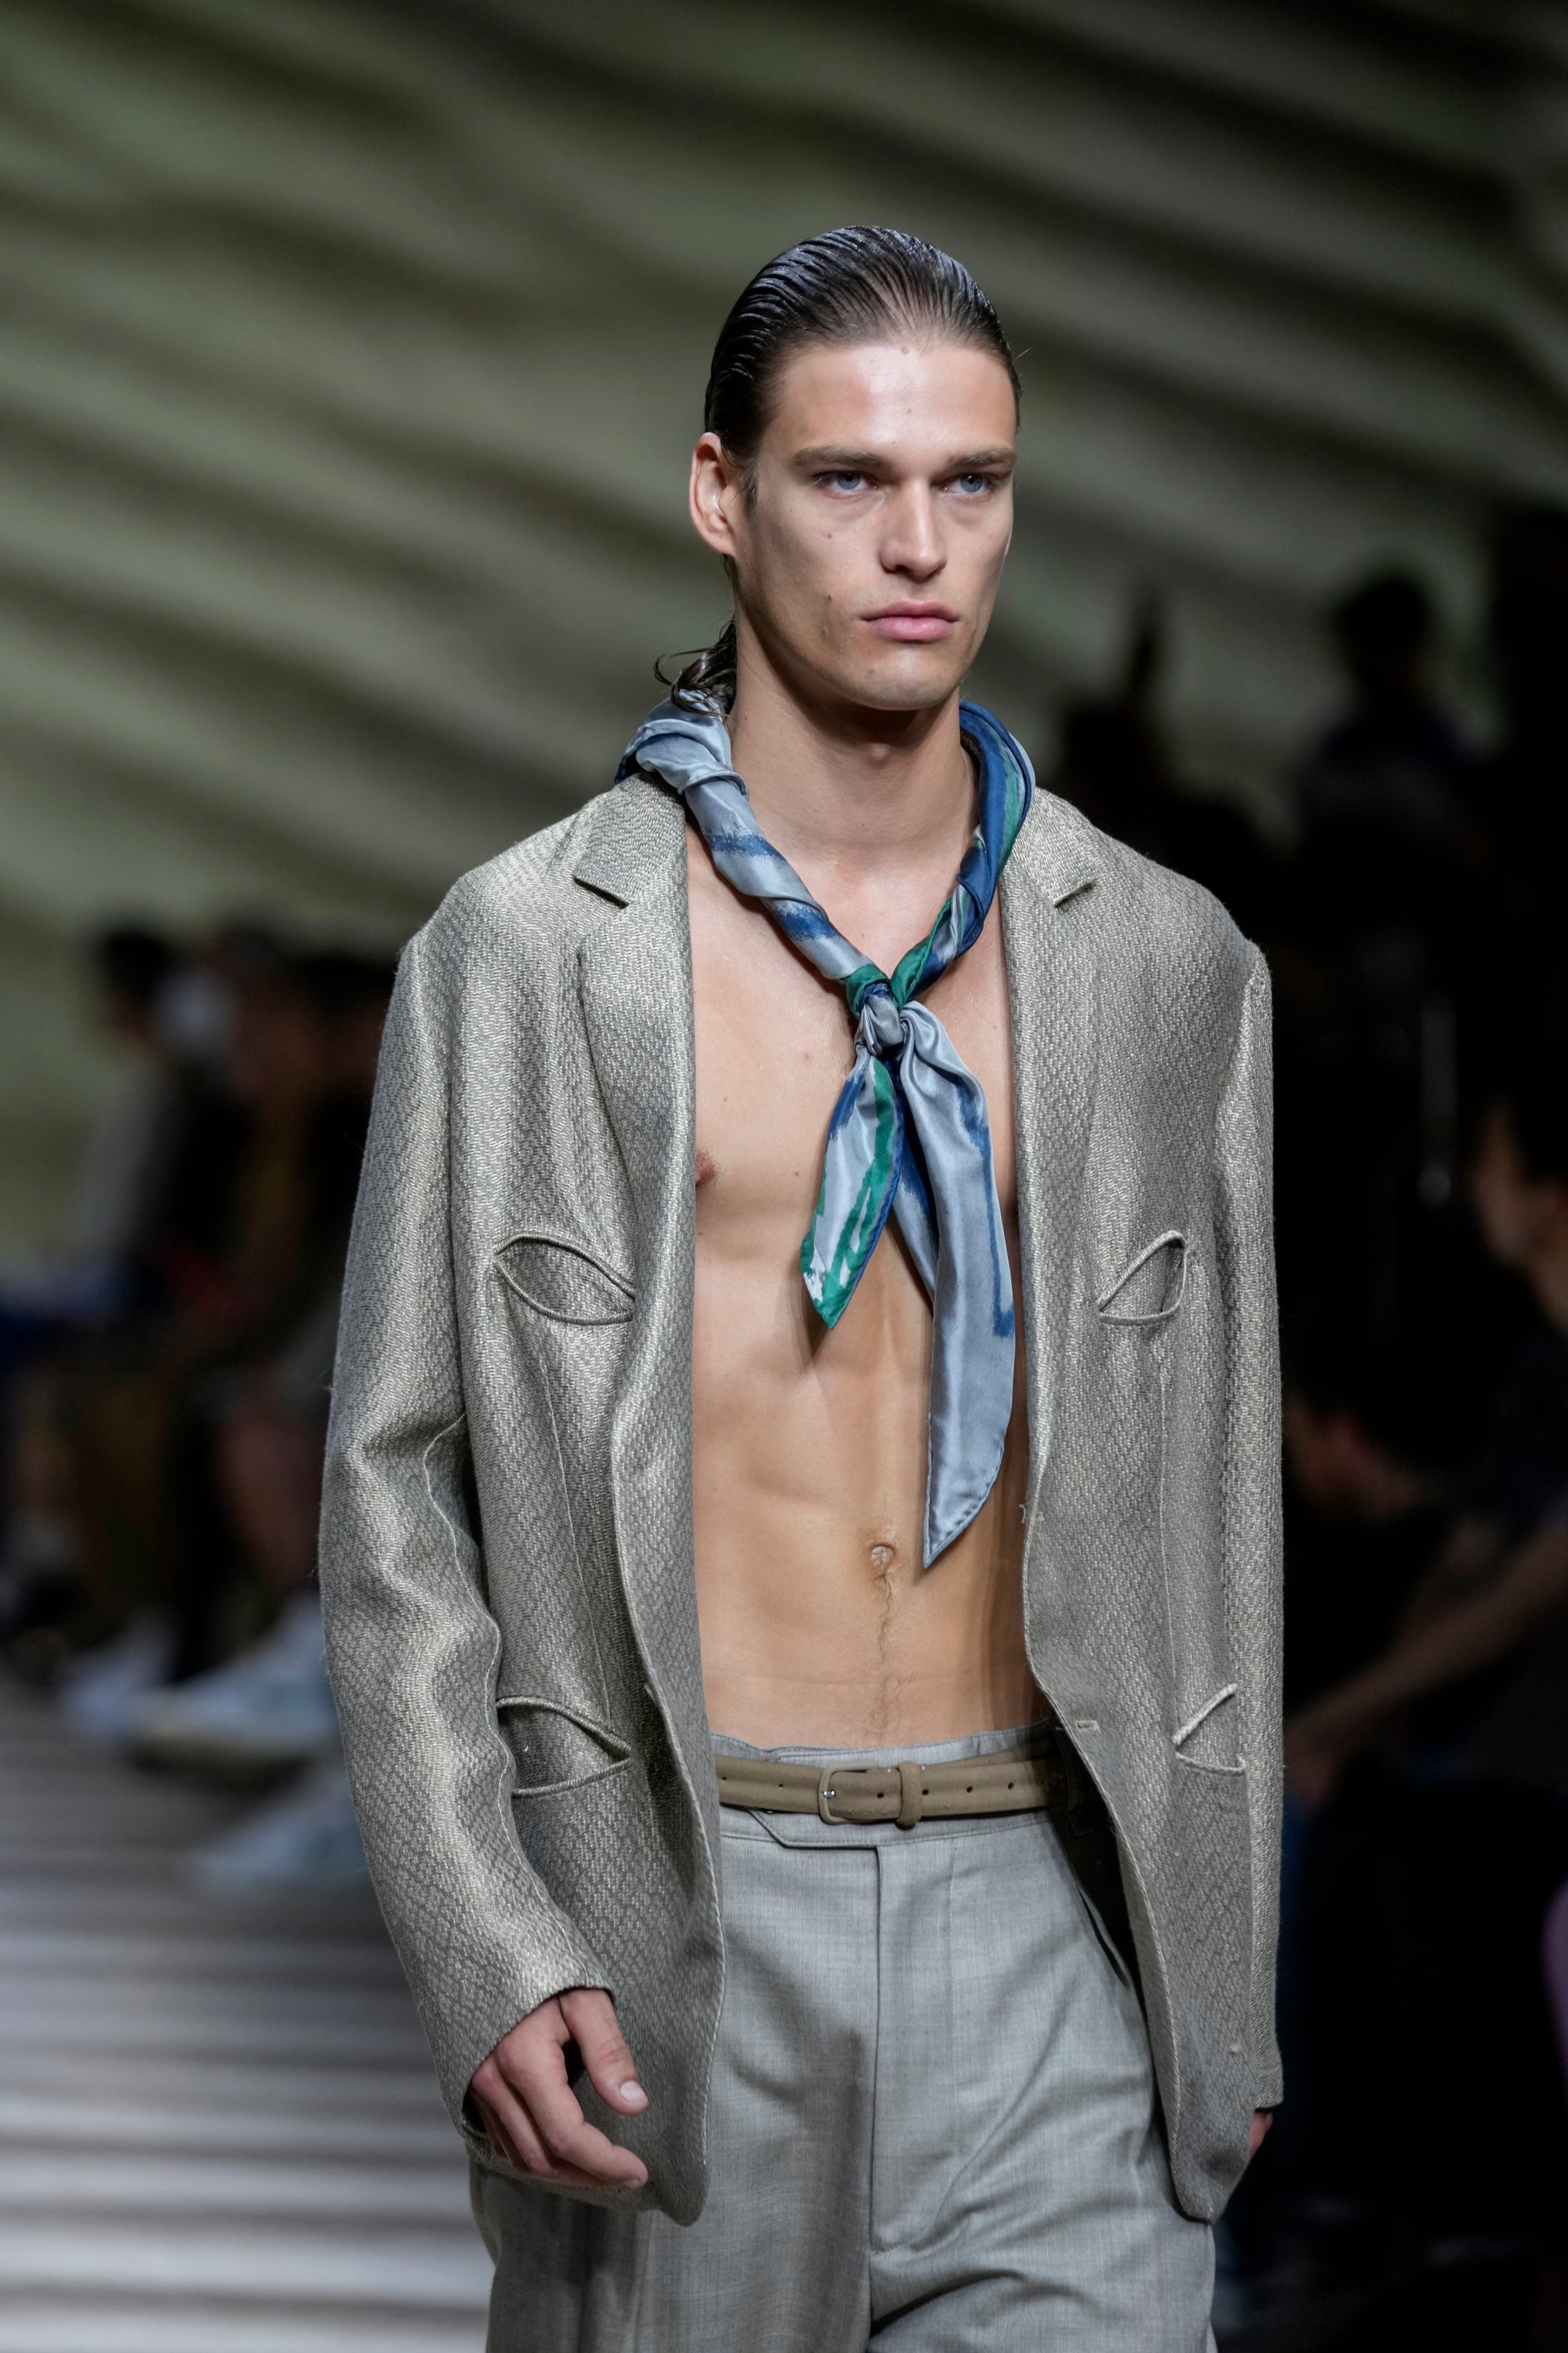 Milan Men's Fashion Week: Giorgio Armani mixed elegance with a touch of  whimsy through colour blocking and surprising prints for spring/summer 2023  in shades of blue